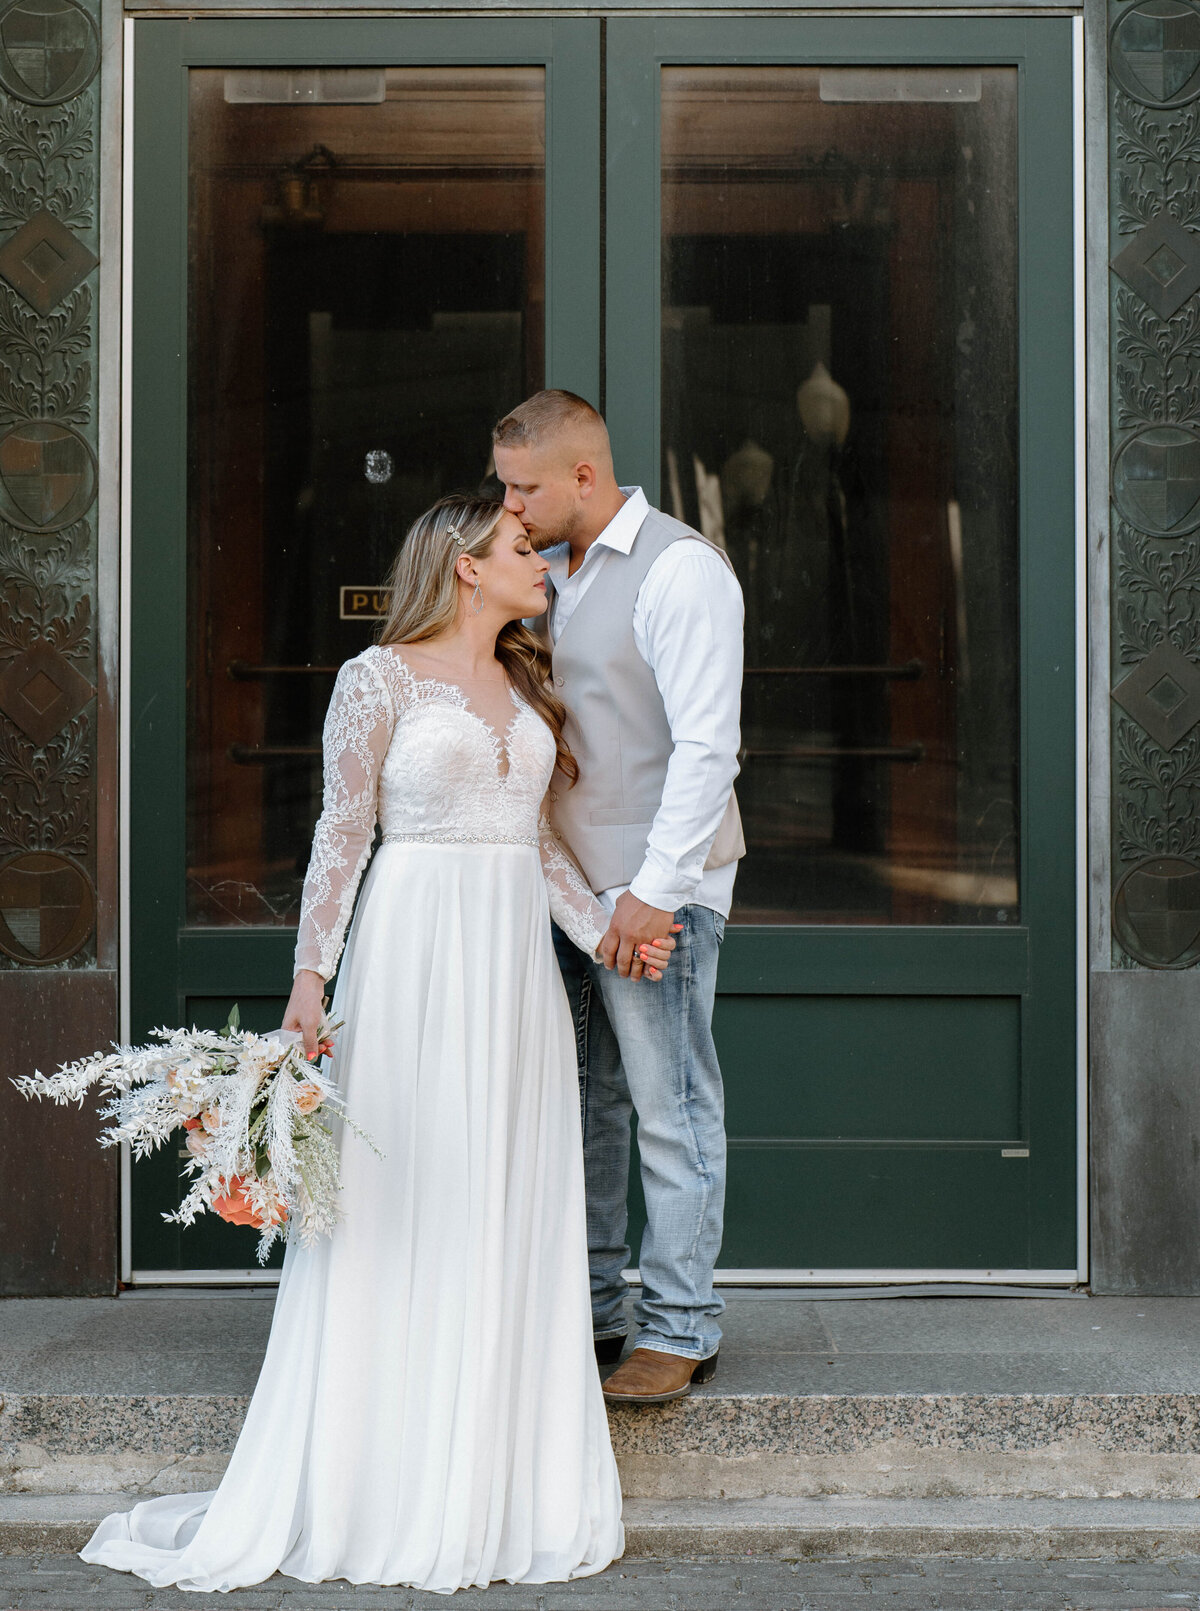 Downtown*beaumont_couples wedding Session-Courtney LaSalle Photography-14